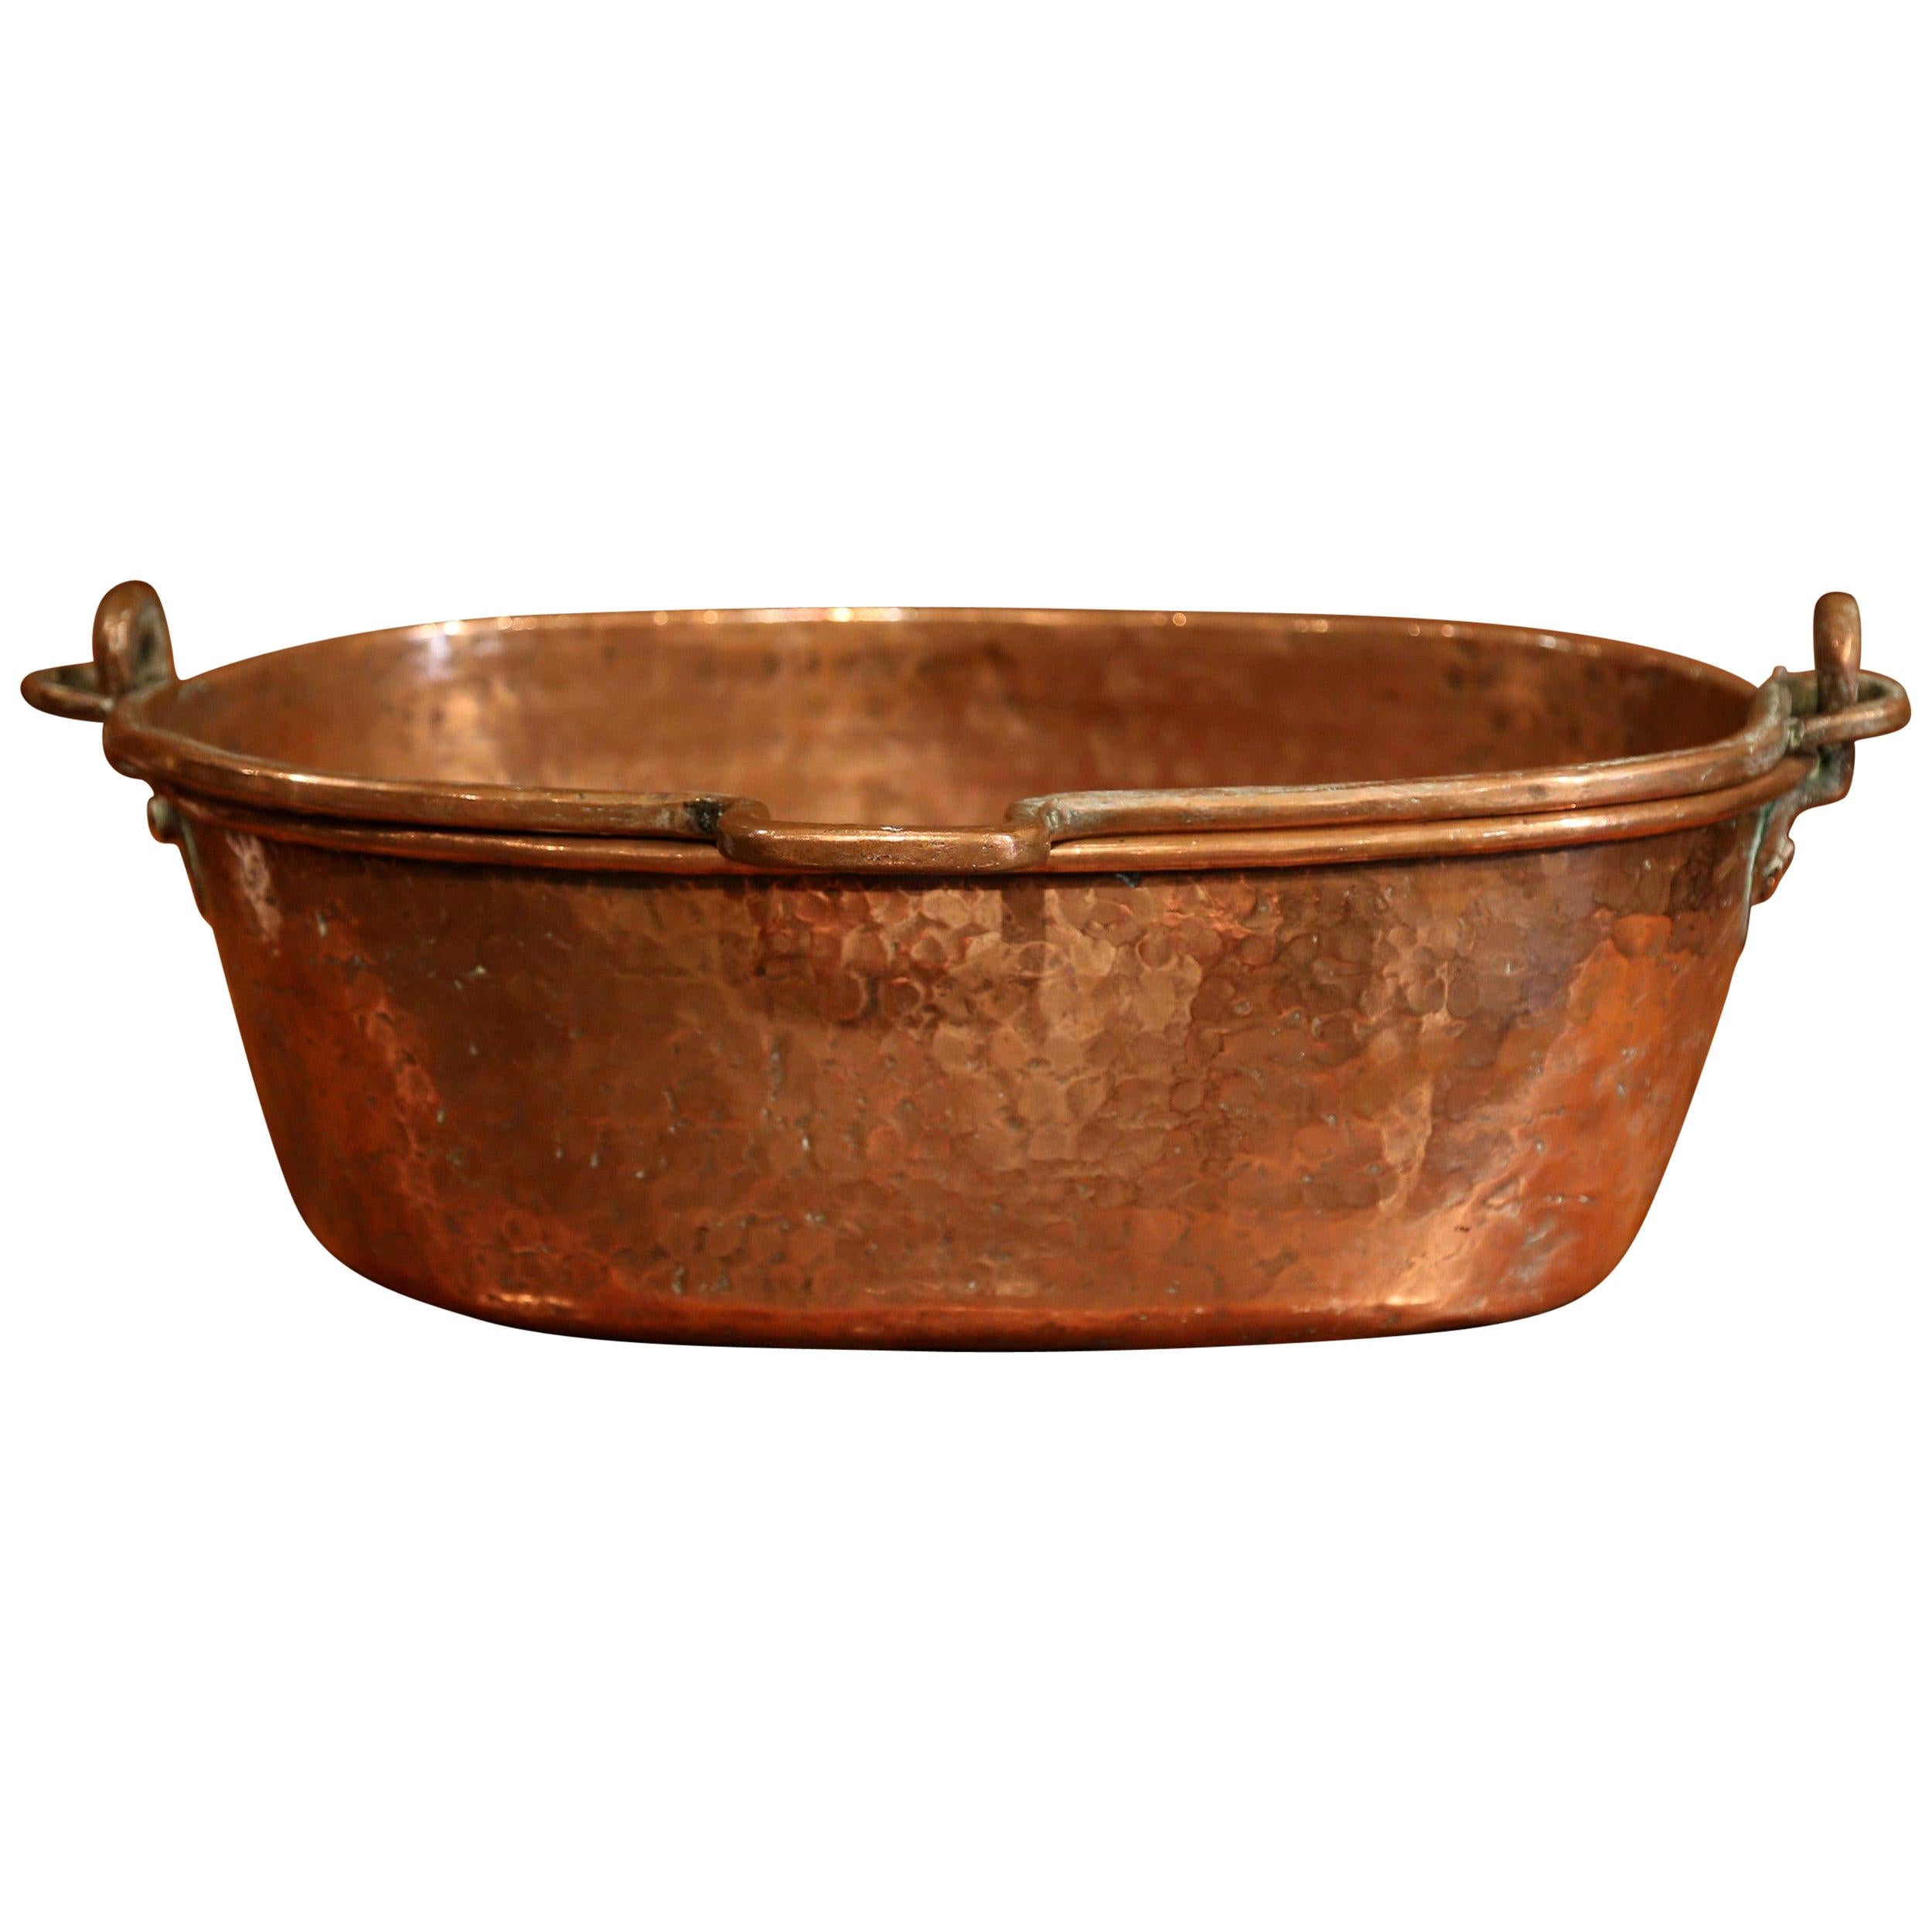 19th Century French Copper Jelly and Jam Boiling Bowl with Handle